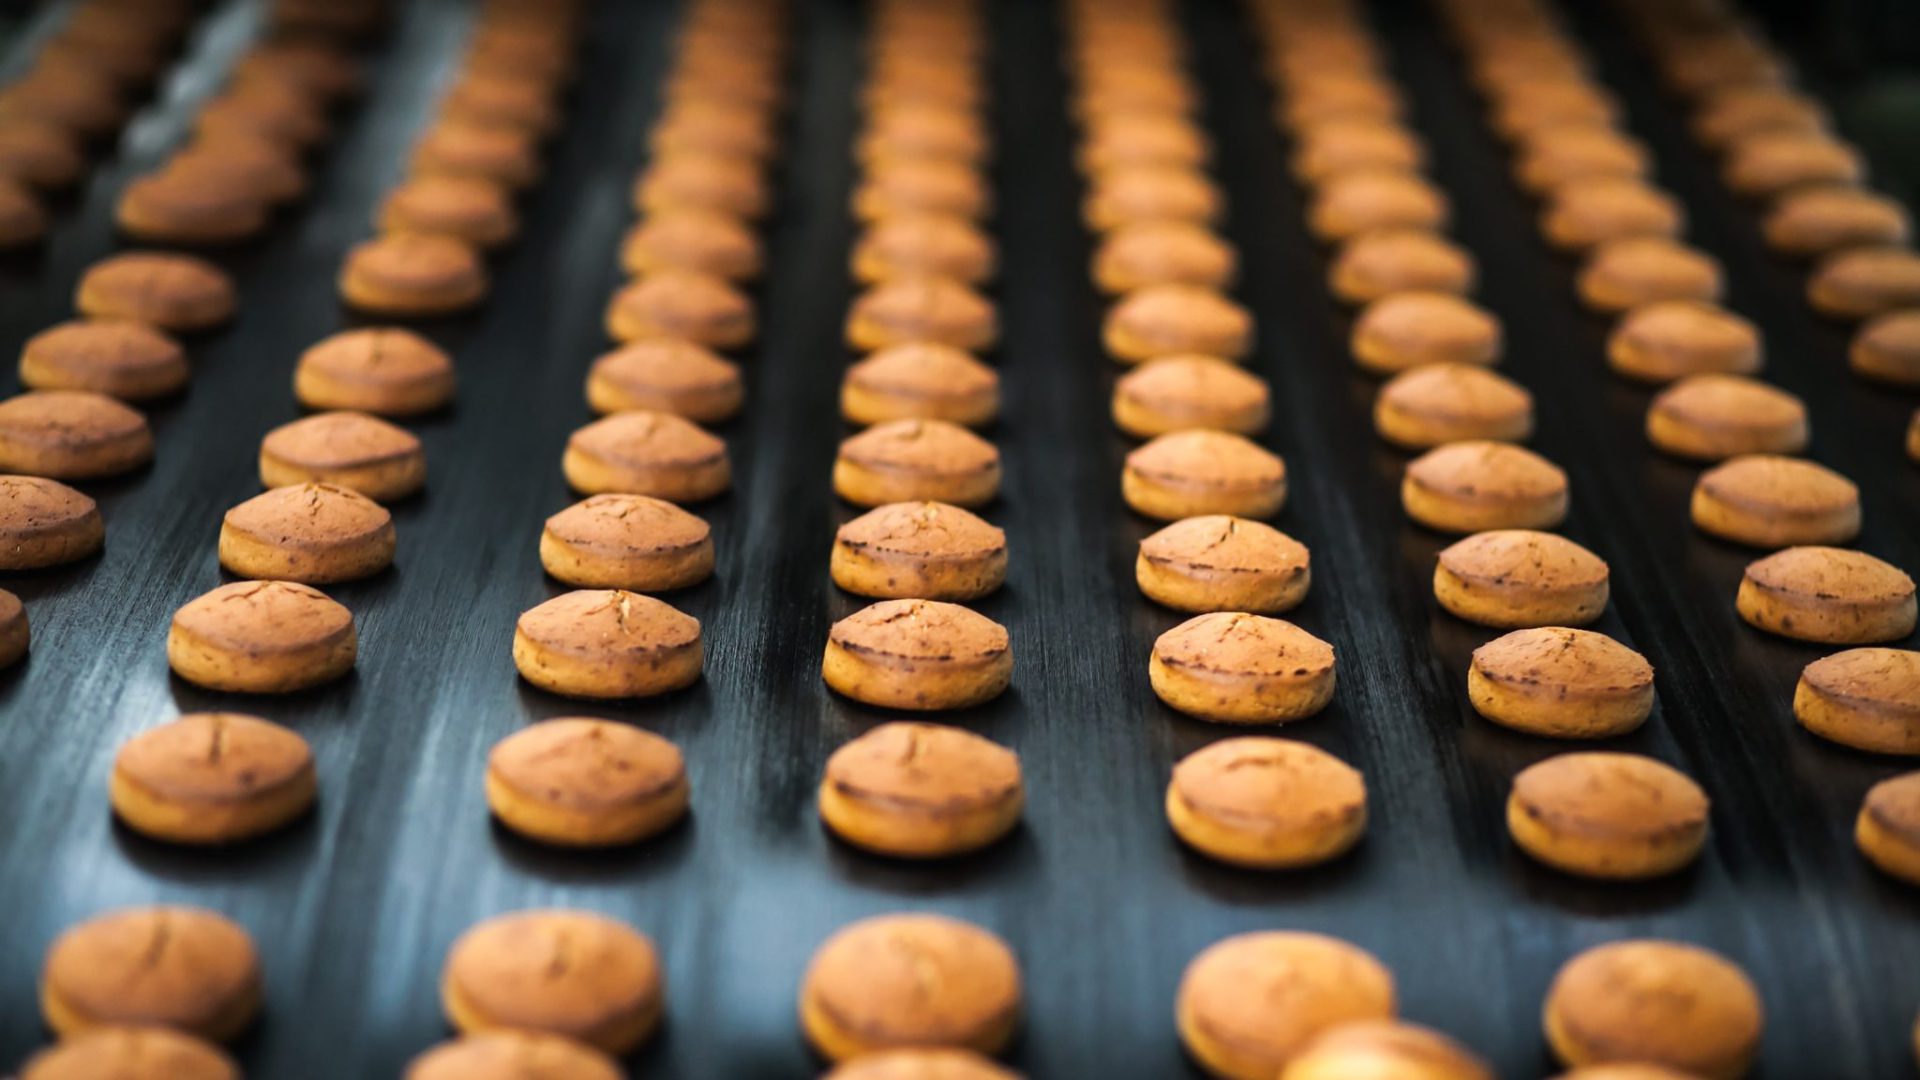 Rows of assorted cookies on a dark surface, representing ERP implementations. Text overlay reads 'ERP Implementations - 10 Things You Should Consider Before Your Next Big ERP Project.